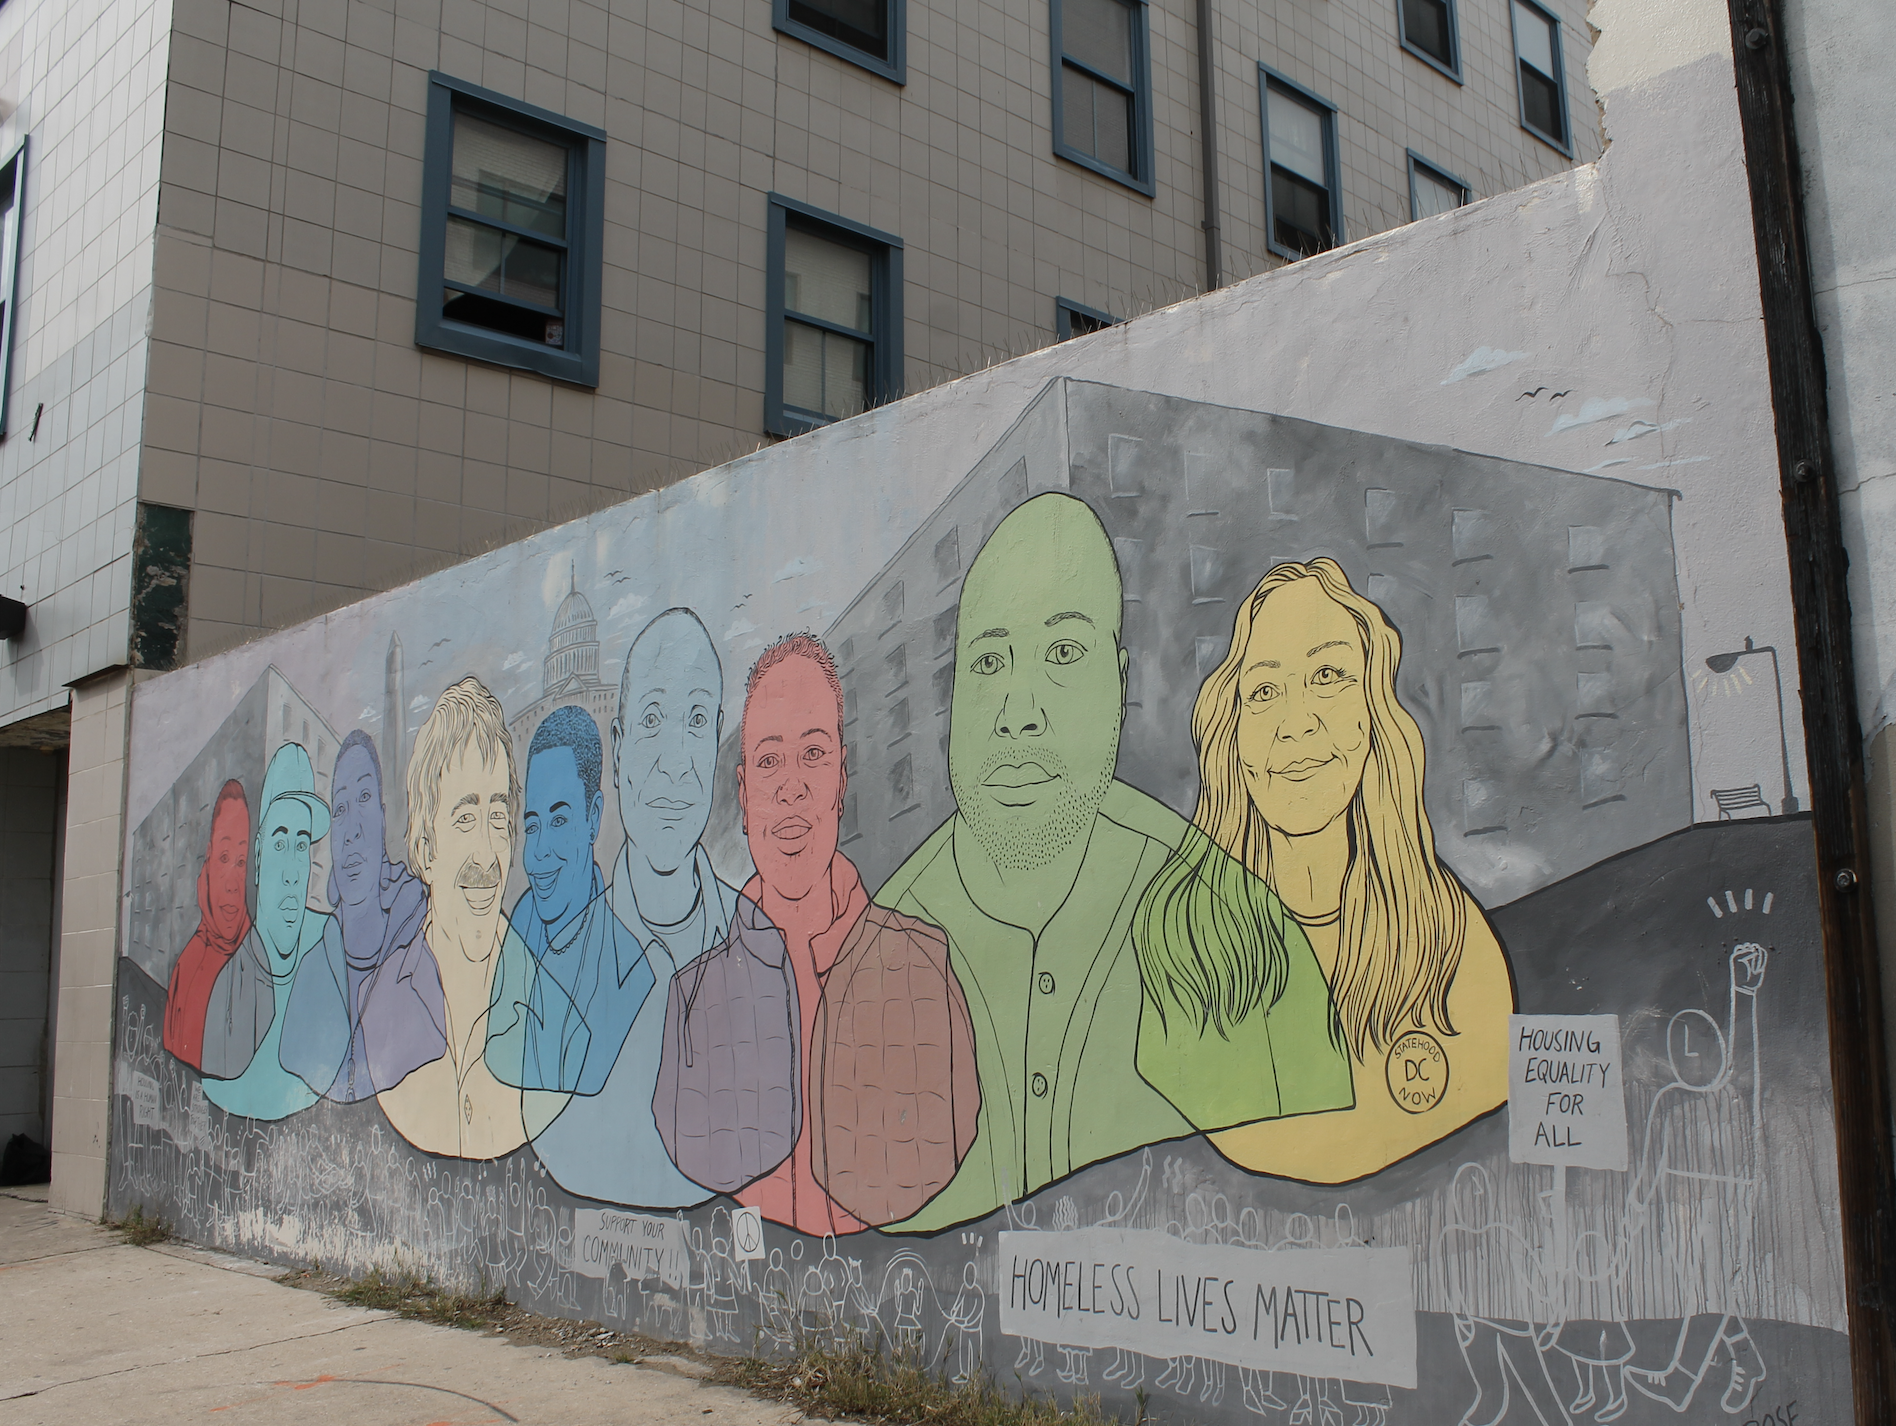 Photo shows the homeless lives matter mural at CCNV shelter, with colorful faces